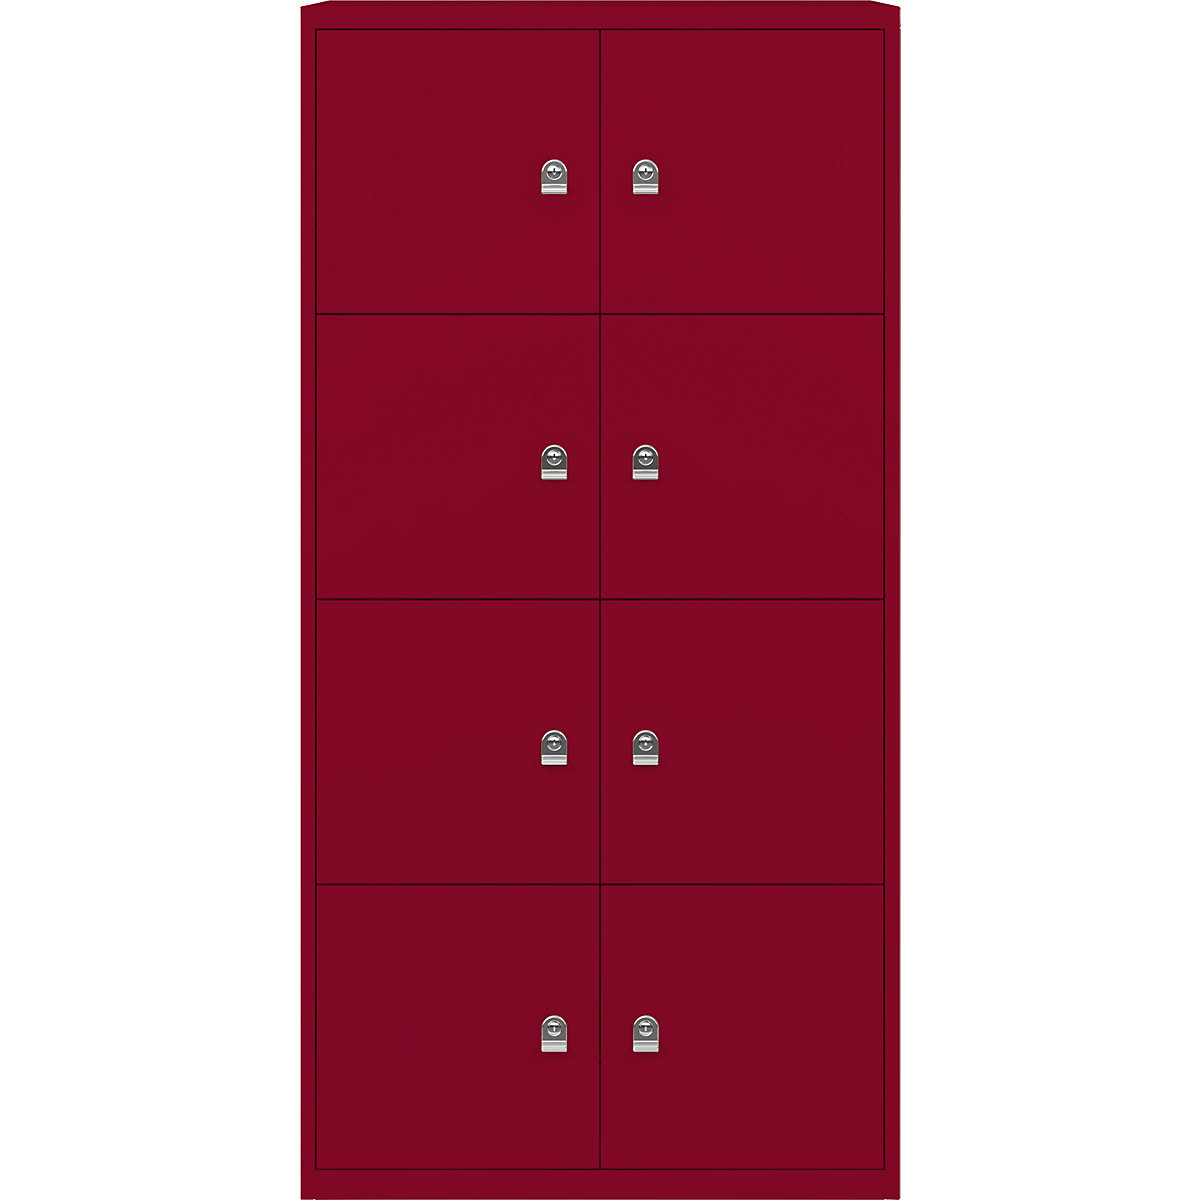 BISLEY – LateralFile™ lodge, with 8 lockable compartments, height 375 mm each, cardinal red